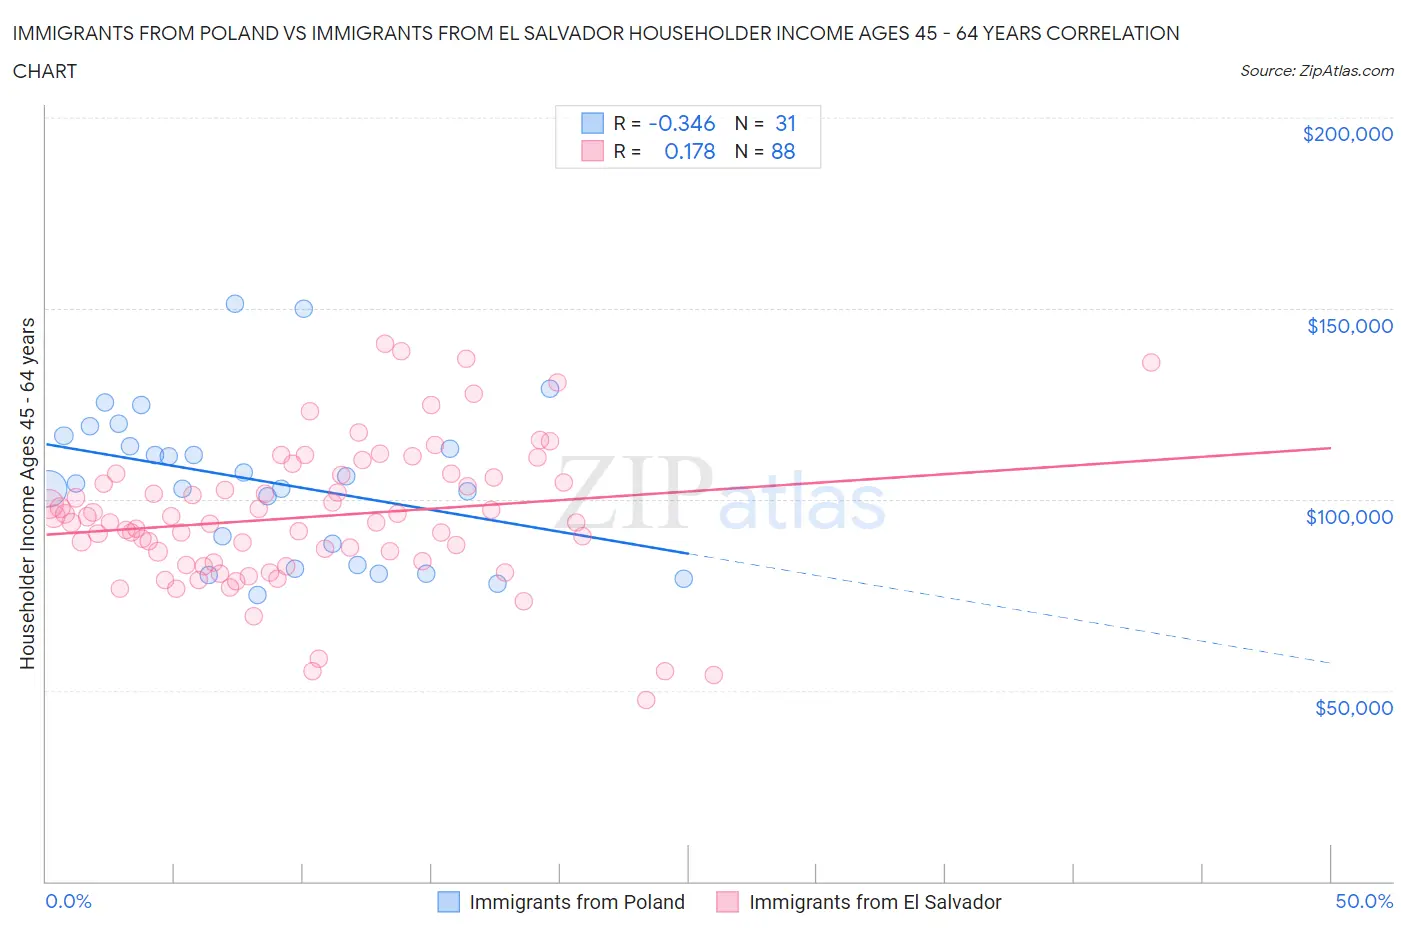 Immigrants from Poland vs Immigrants from El Salvador Householder Income Ages 45 - 64 years